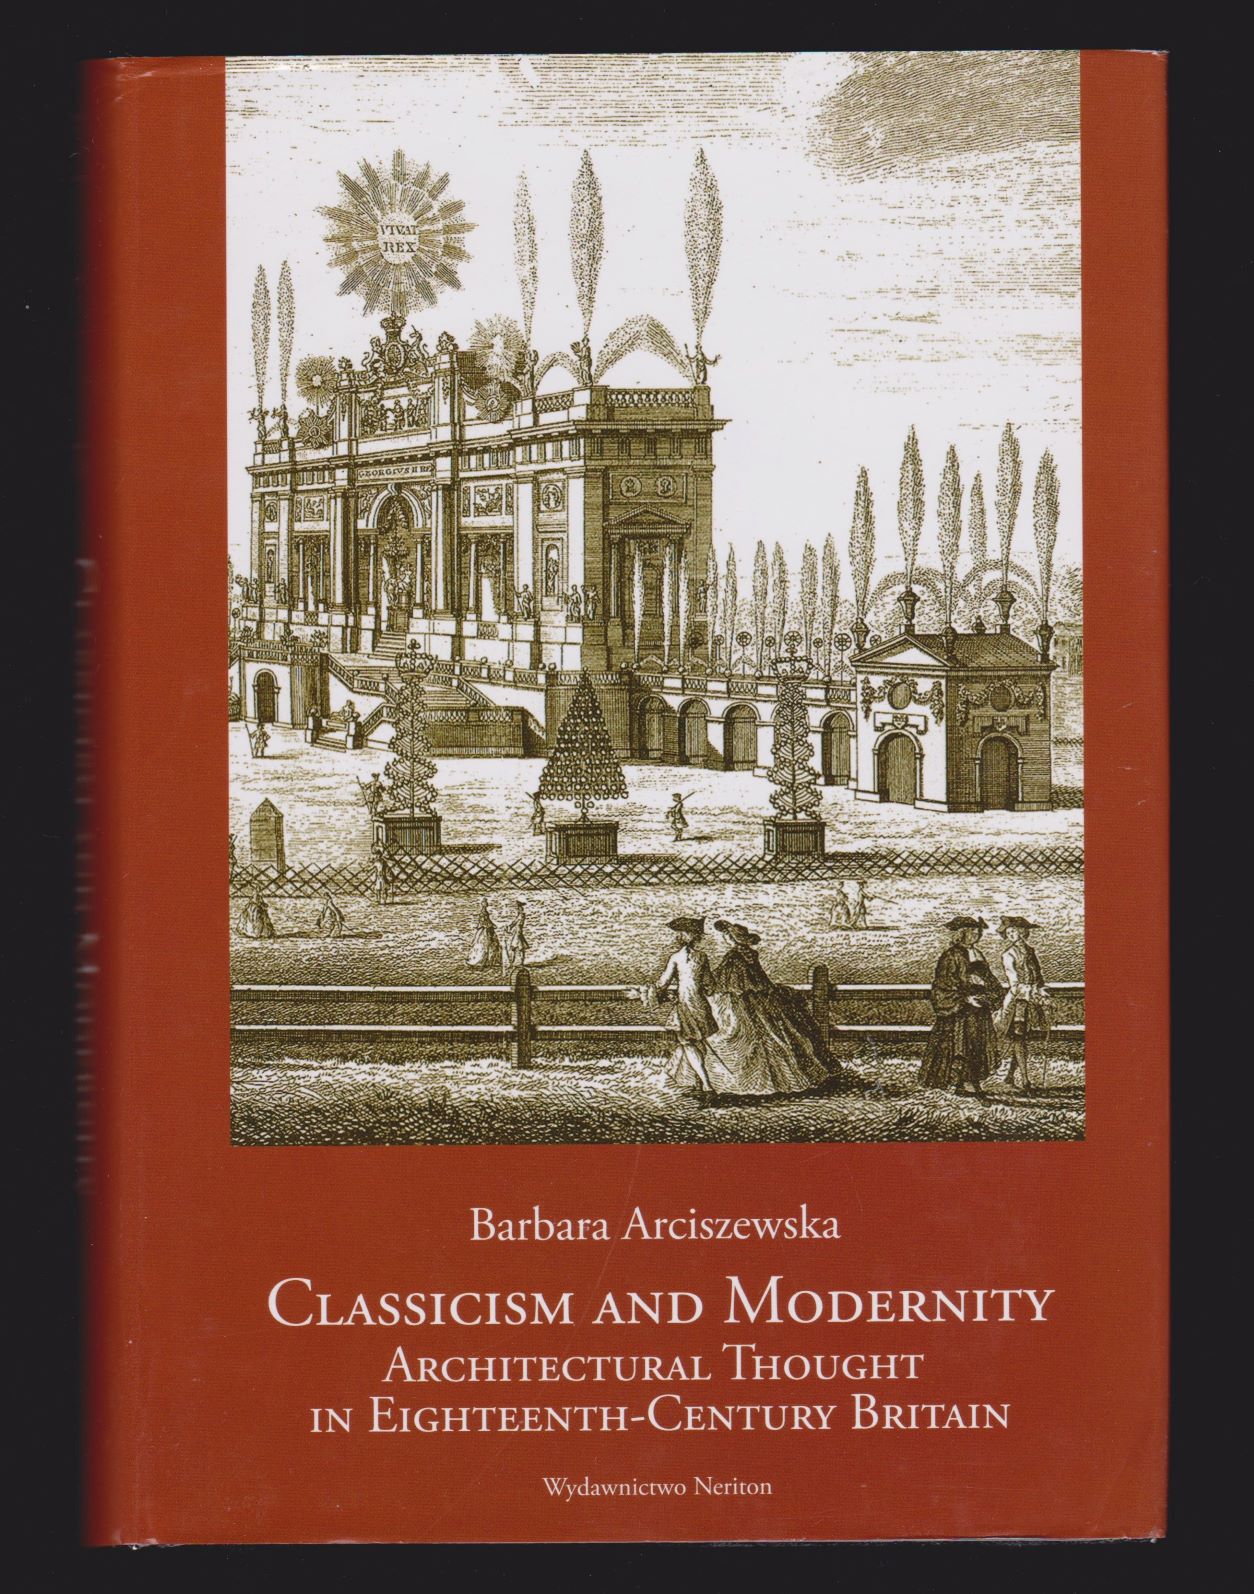 Classicism and Modernity: Architectural Thought in Eighteenth-Century Britain - Barbara Arciszewska